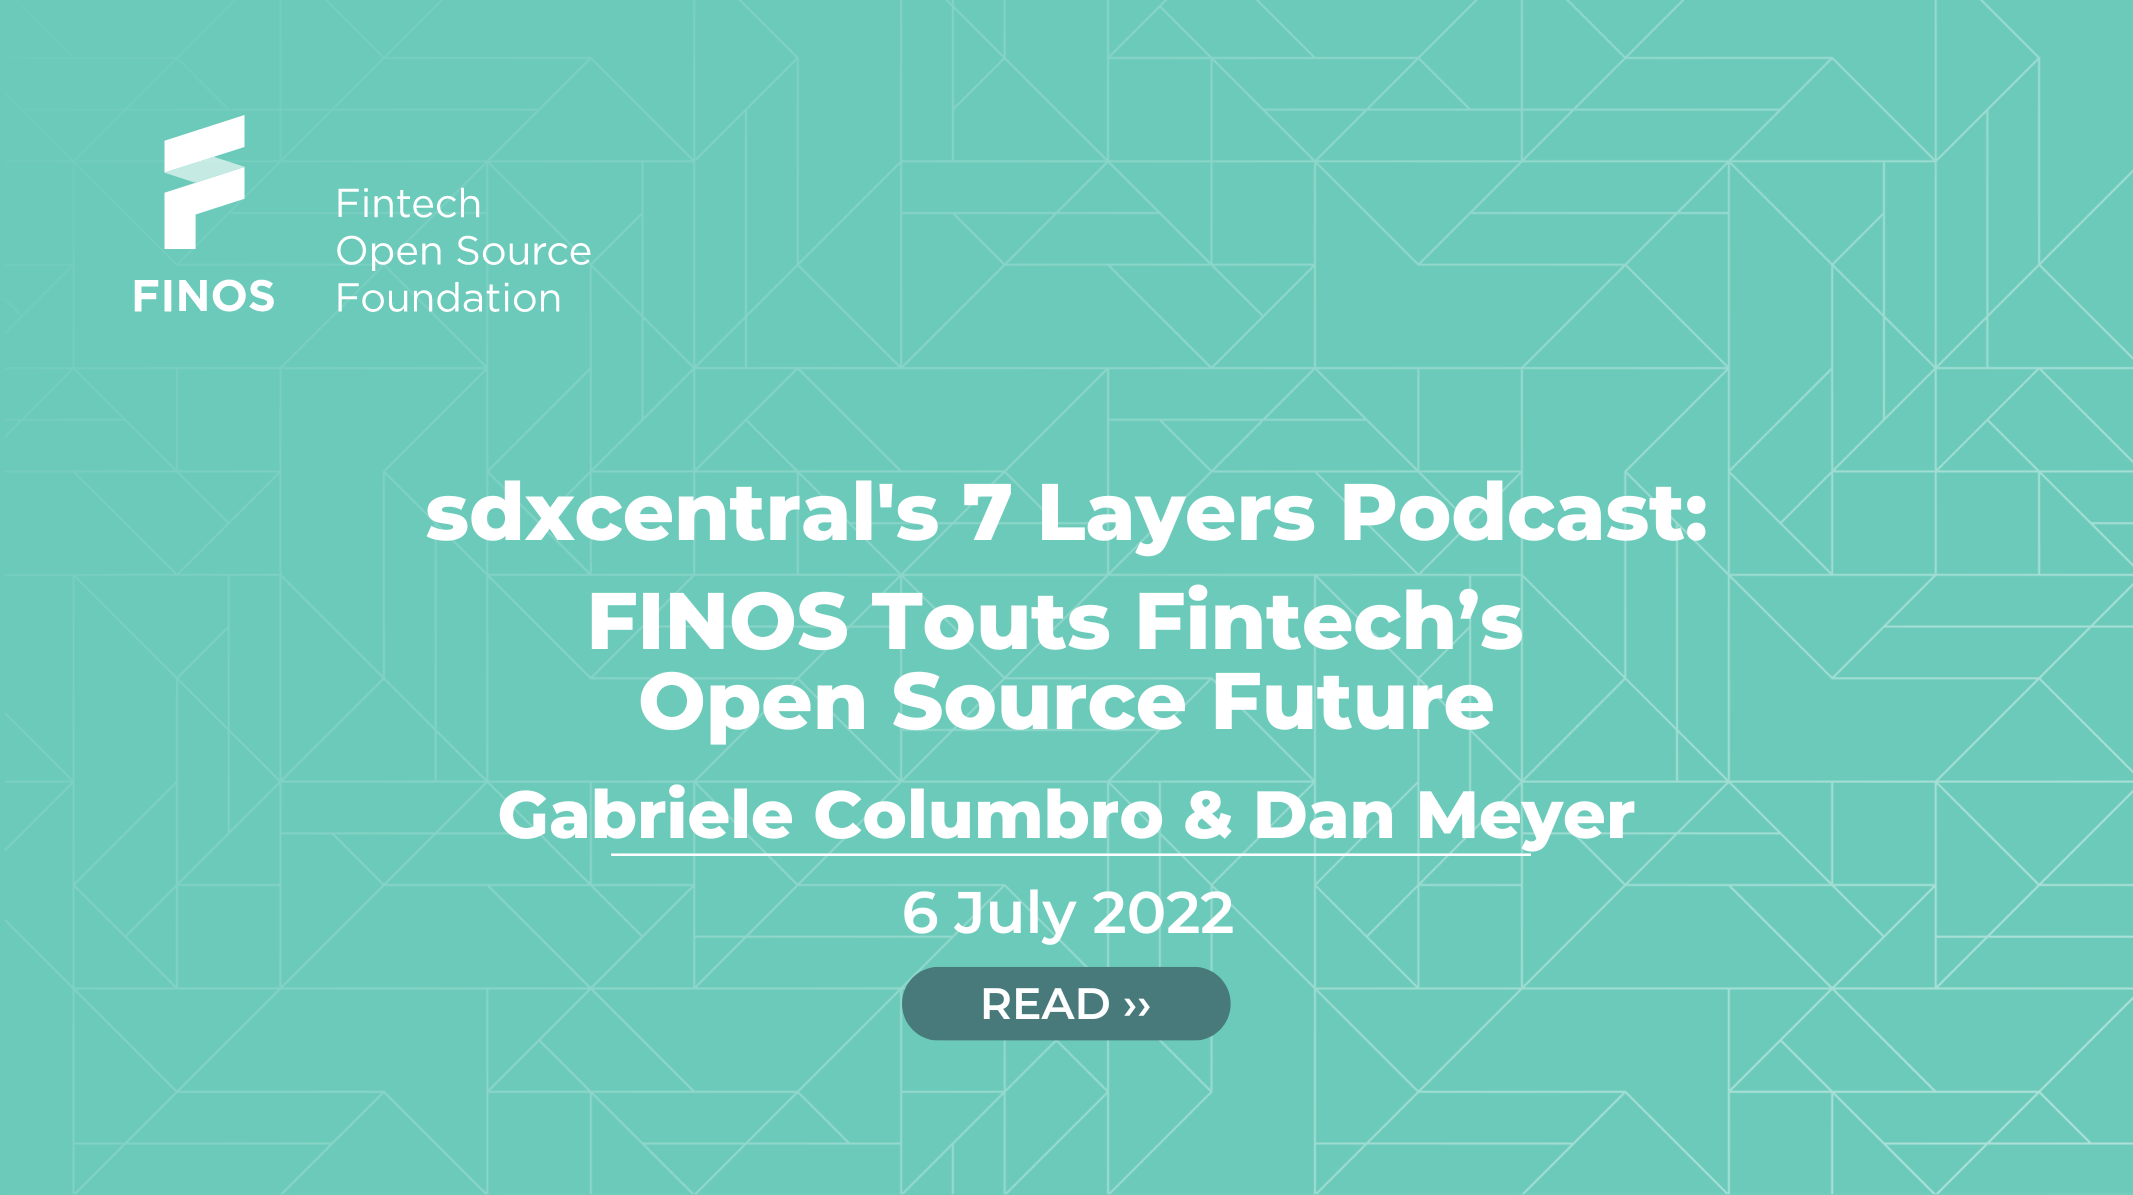 sdxcentral's 7 Layers Podcast: FINOS Touts Fintech's Open Source Future